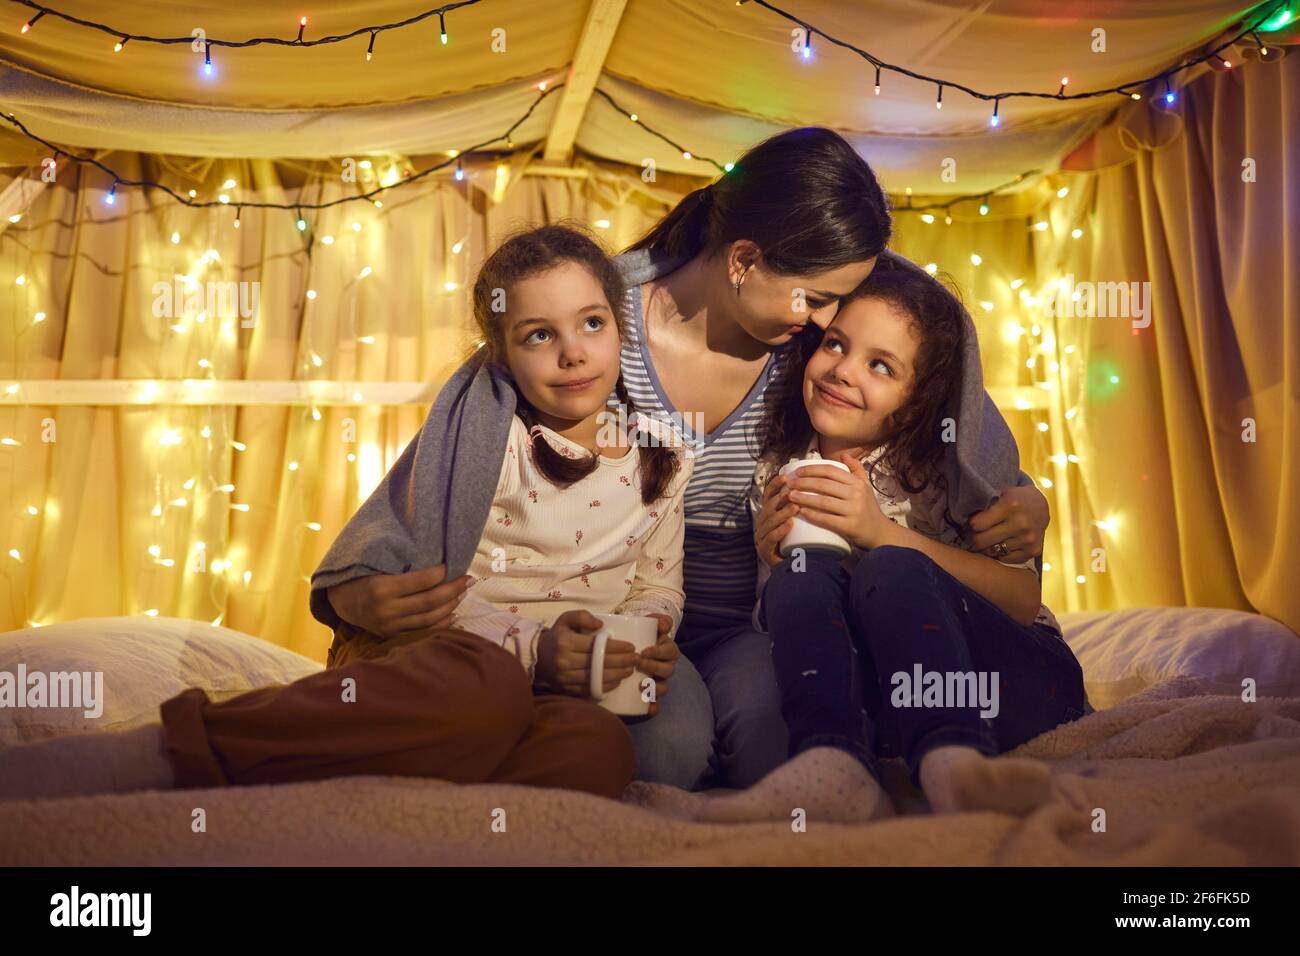 Mother hugs two daughters drinking tea or milk in kids tent before bedtime Stock Photo